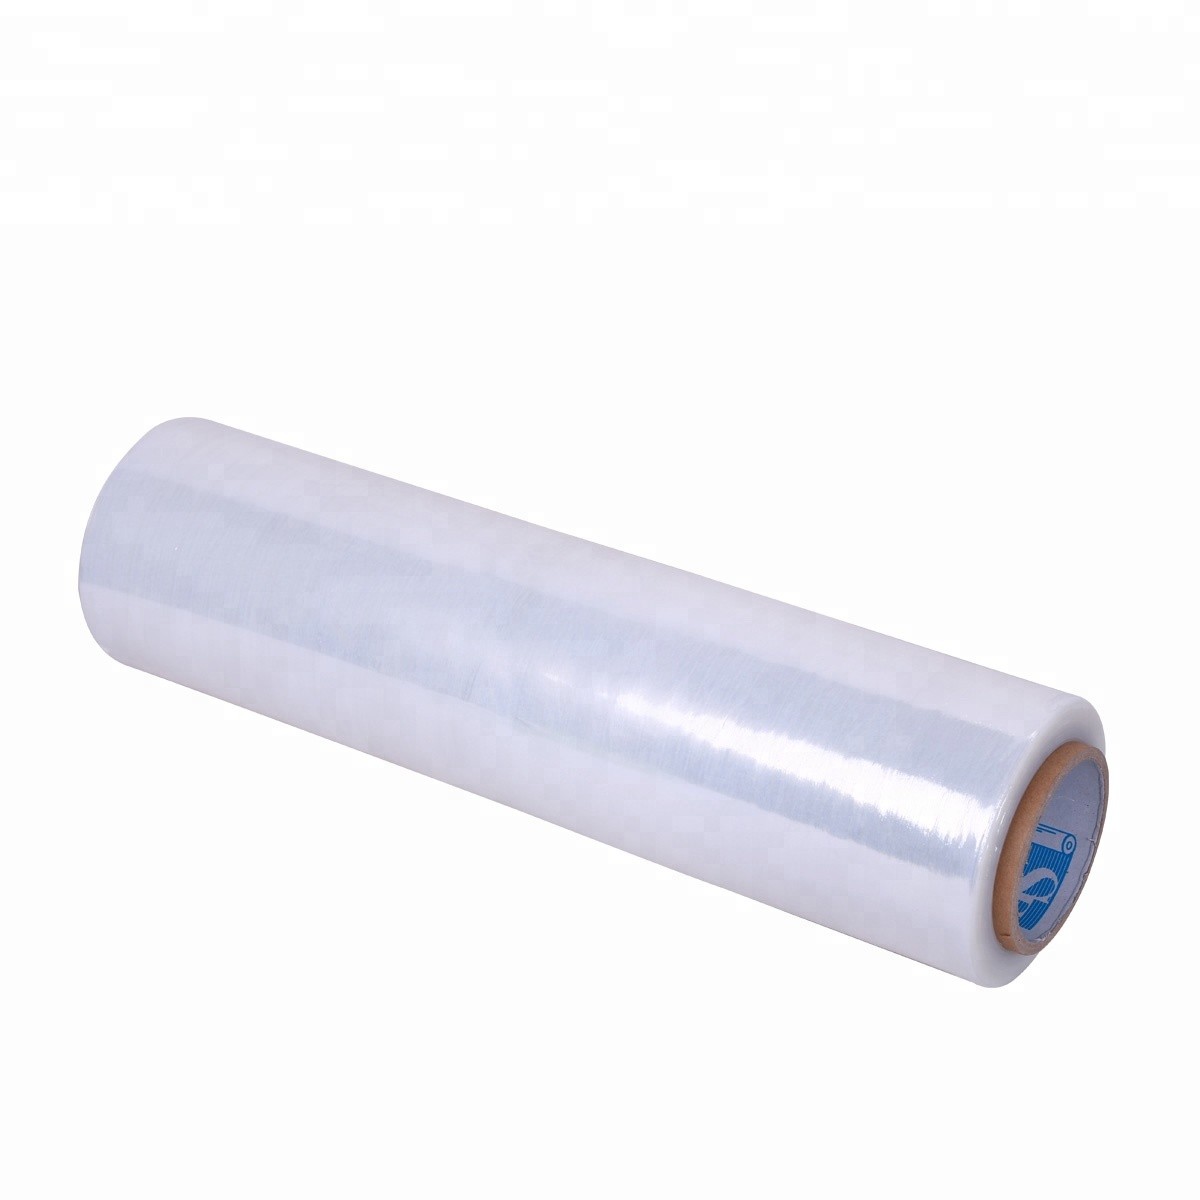 15 years factory free samples high quality plastic film roll for agriculture